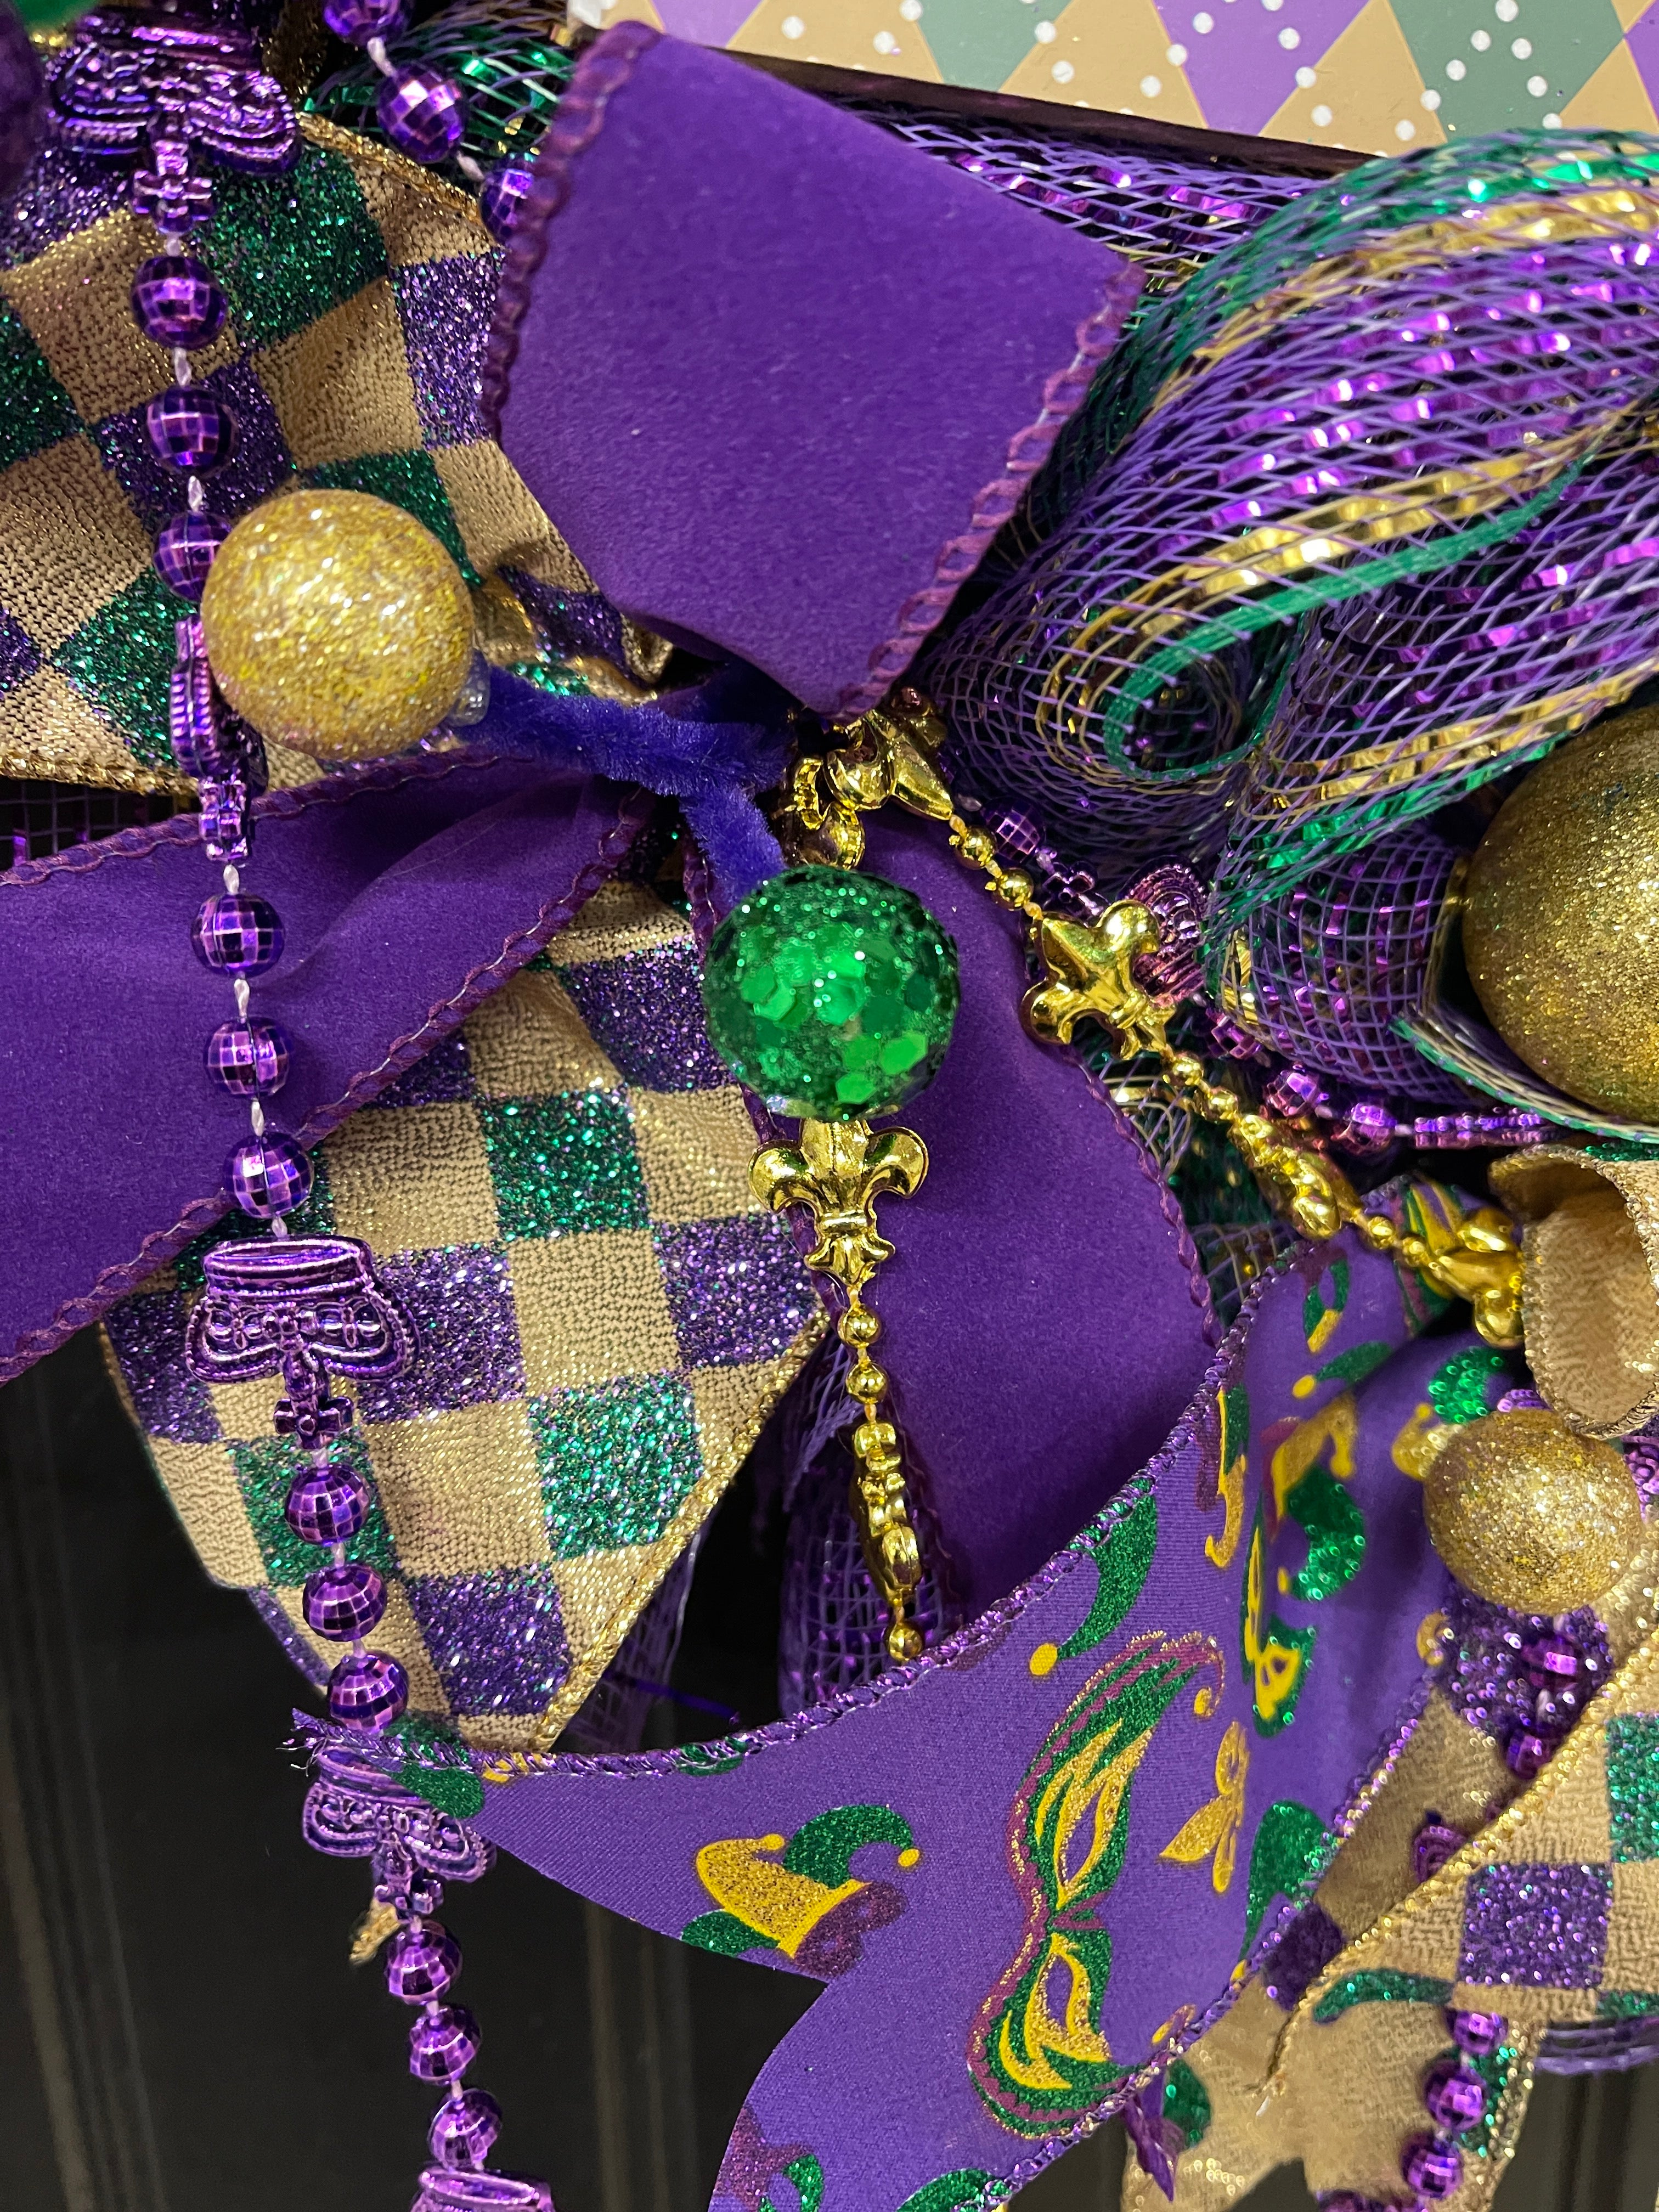 Close Up Detail of Green and Gold Glitter Balls with Purple and Gold Beads, Purple Velvet Ribbon, Purple and Green Harlequin Ribbon, Masks and Jester on Purple Ribbon